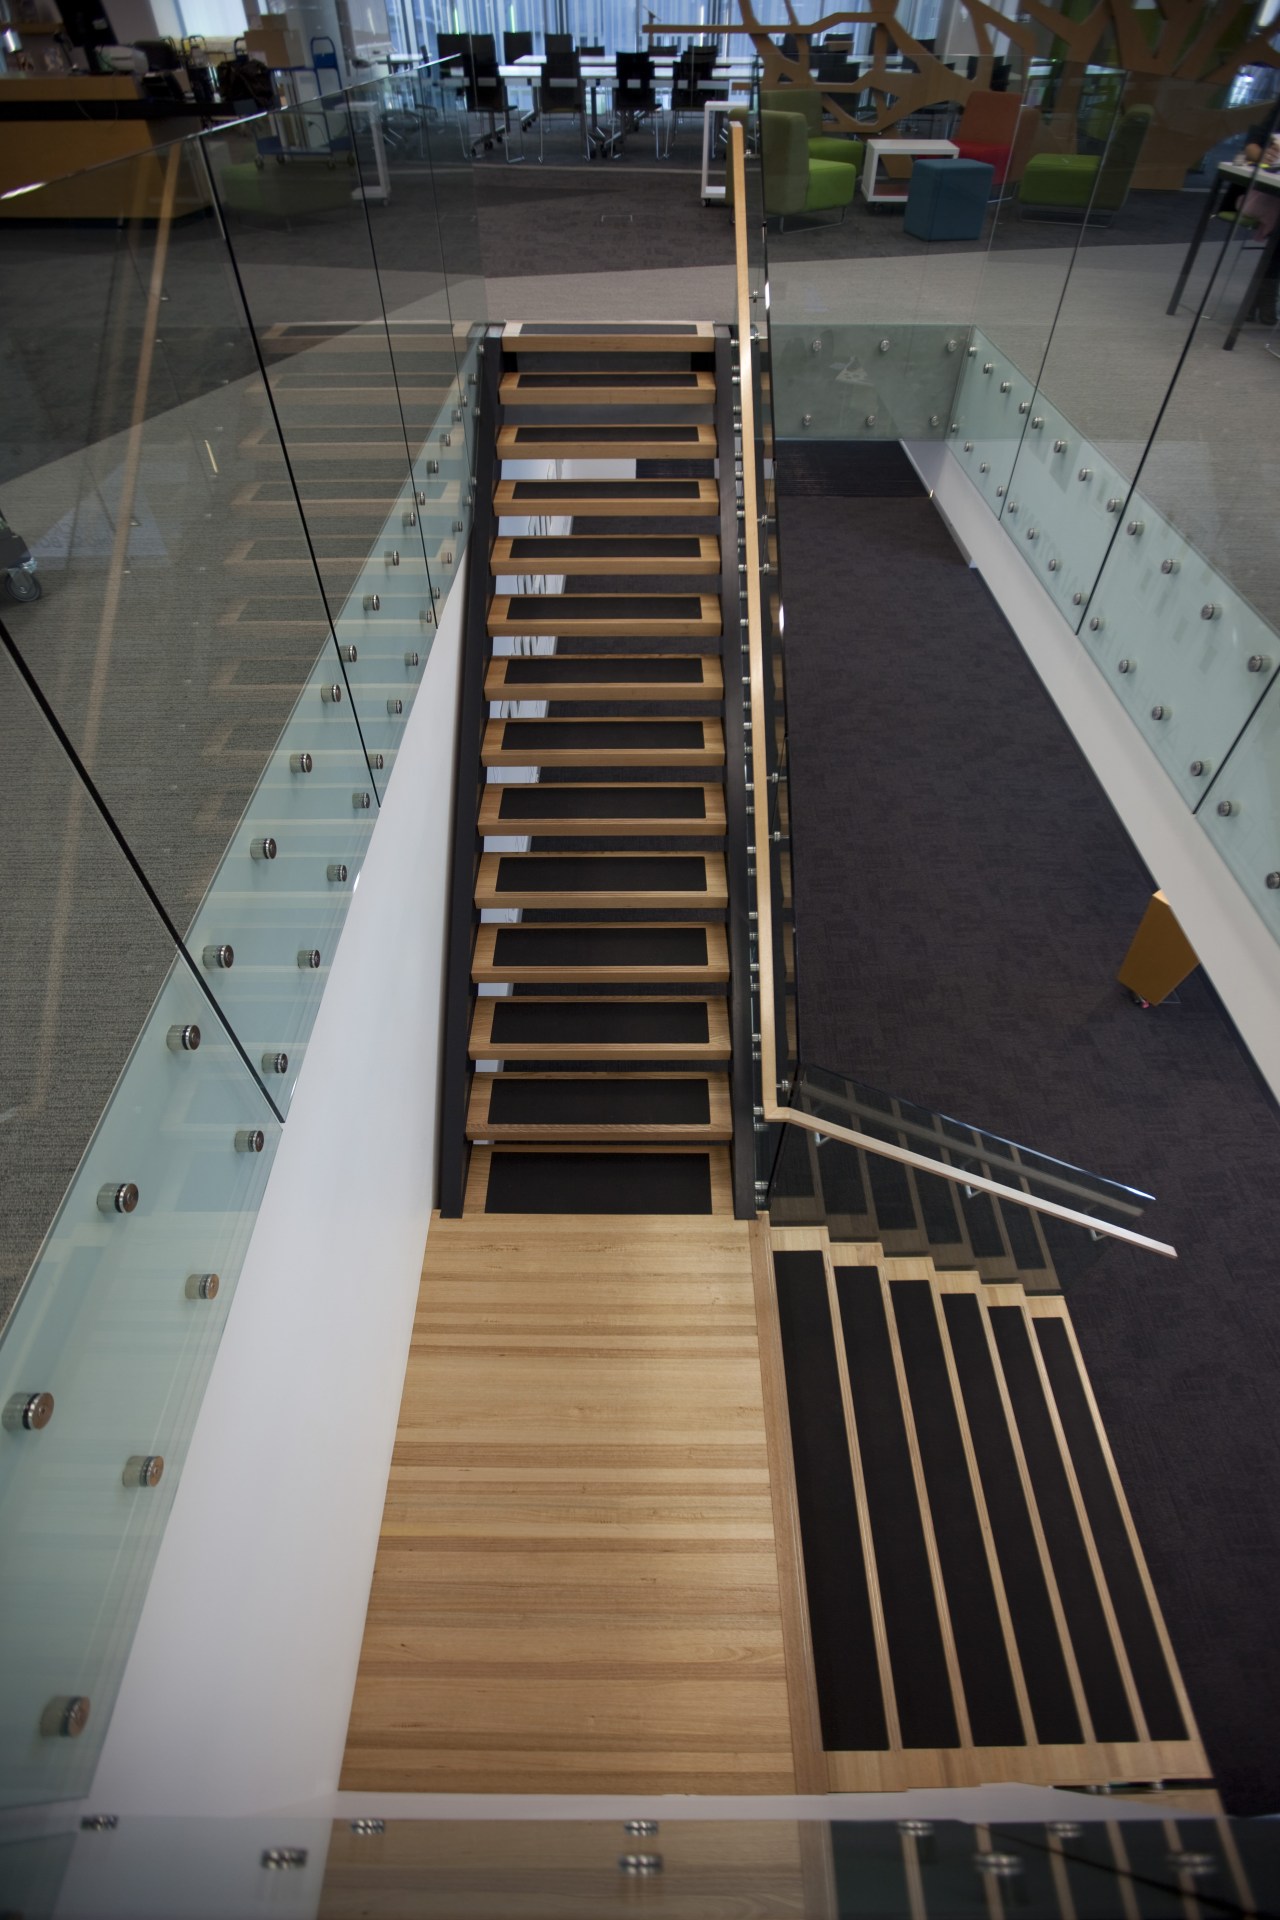 Contemporary office stairway floor, flooring, handrail, stairs, structure, wood, black, gray